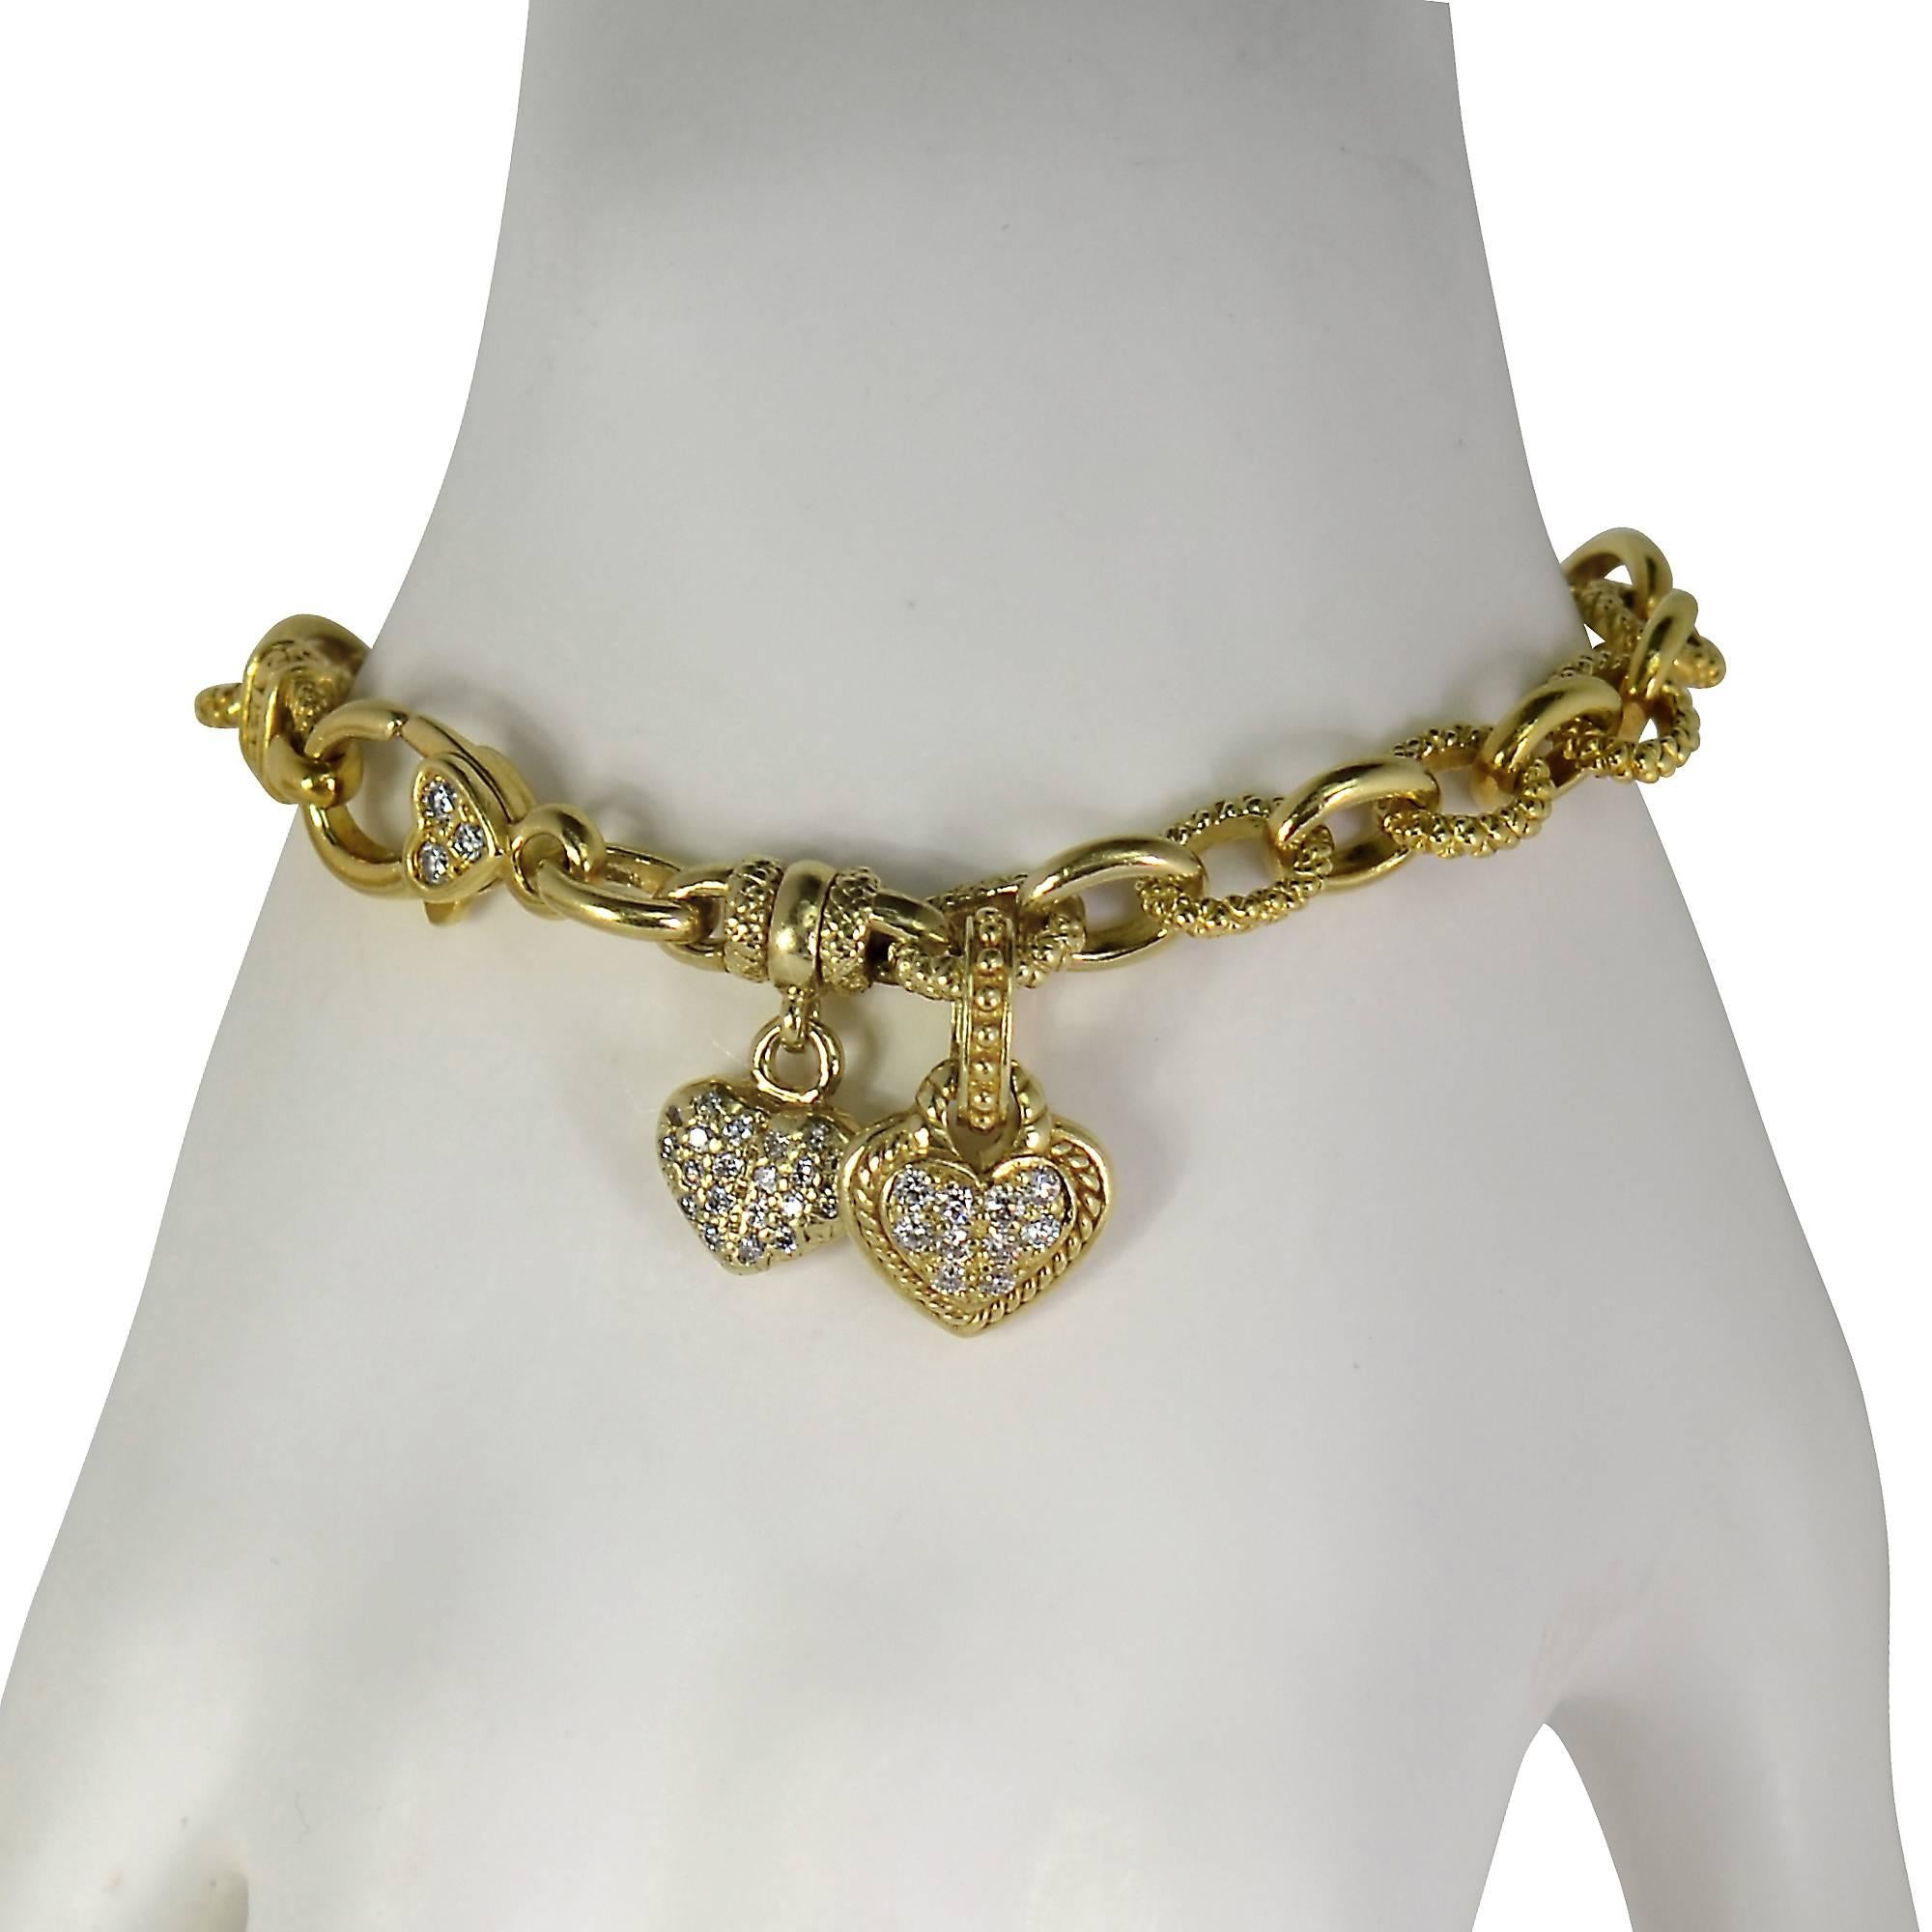 Fabulous Judith Ripka diamond bracelet crafted in 18k yellow gold featuring 33 round brilliant cut diamonds weighing approximately .75cts total, G color, VS-SI clarity. The bracelet is adorned with hearts studded with diamonds further accented by